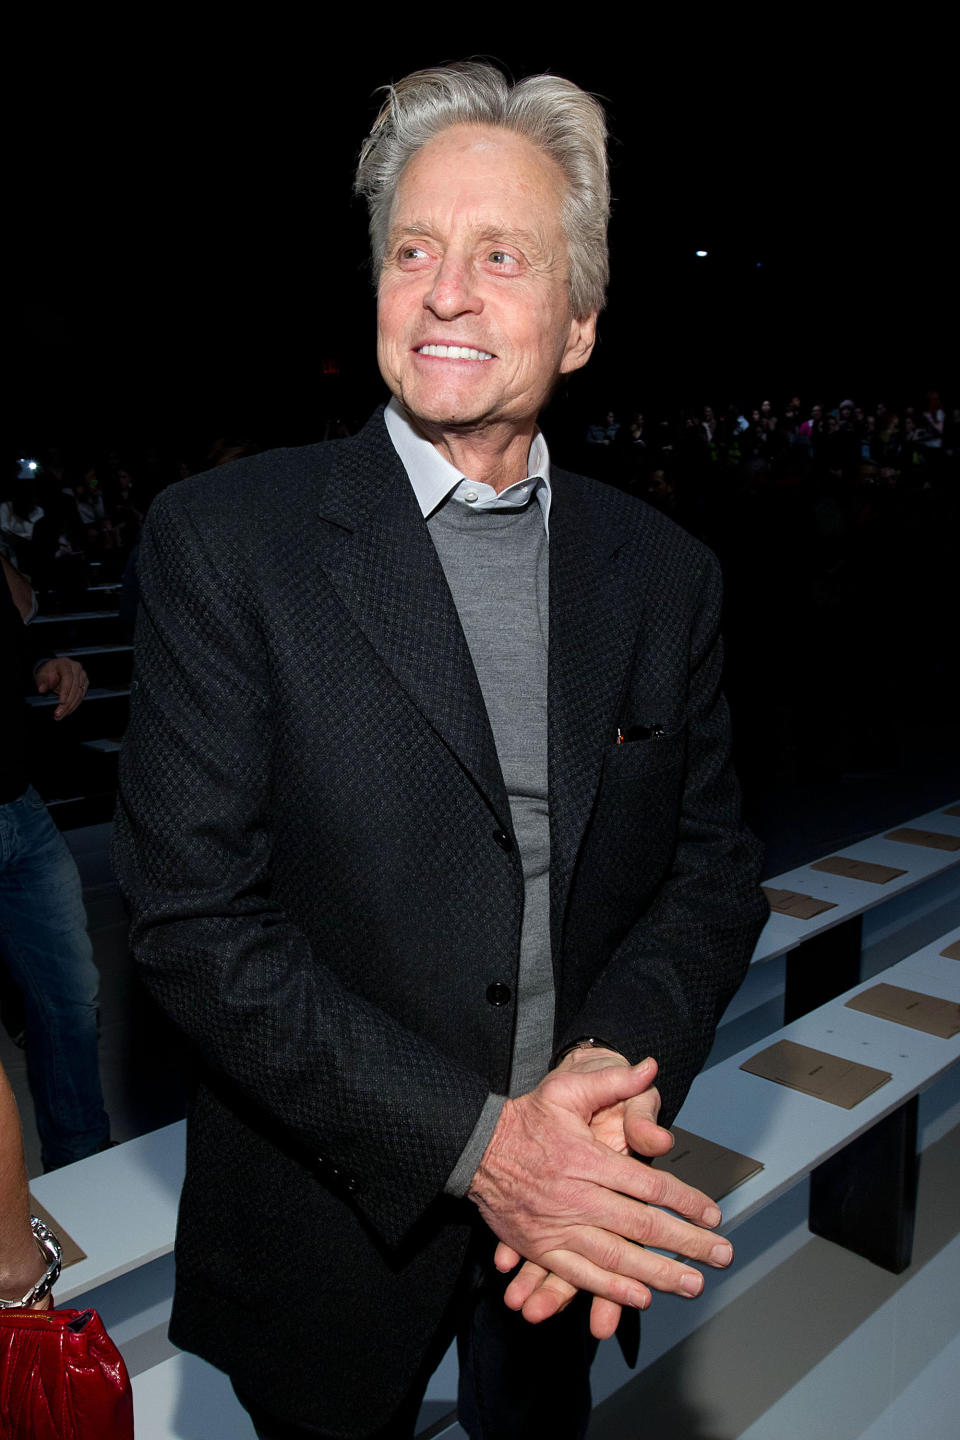 Michael Douglas attends the Fall 2013 Michael Kors Runway Show, on Wednesday, Feb. 13, 2013 in New York. (Photo by Dario Cantatore/Invision/AP)